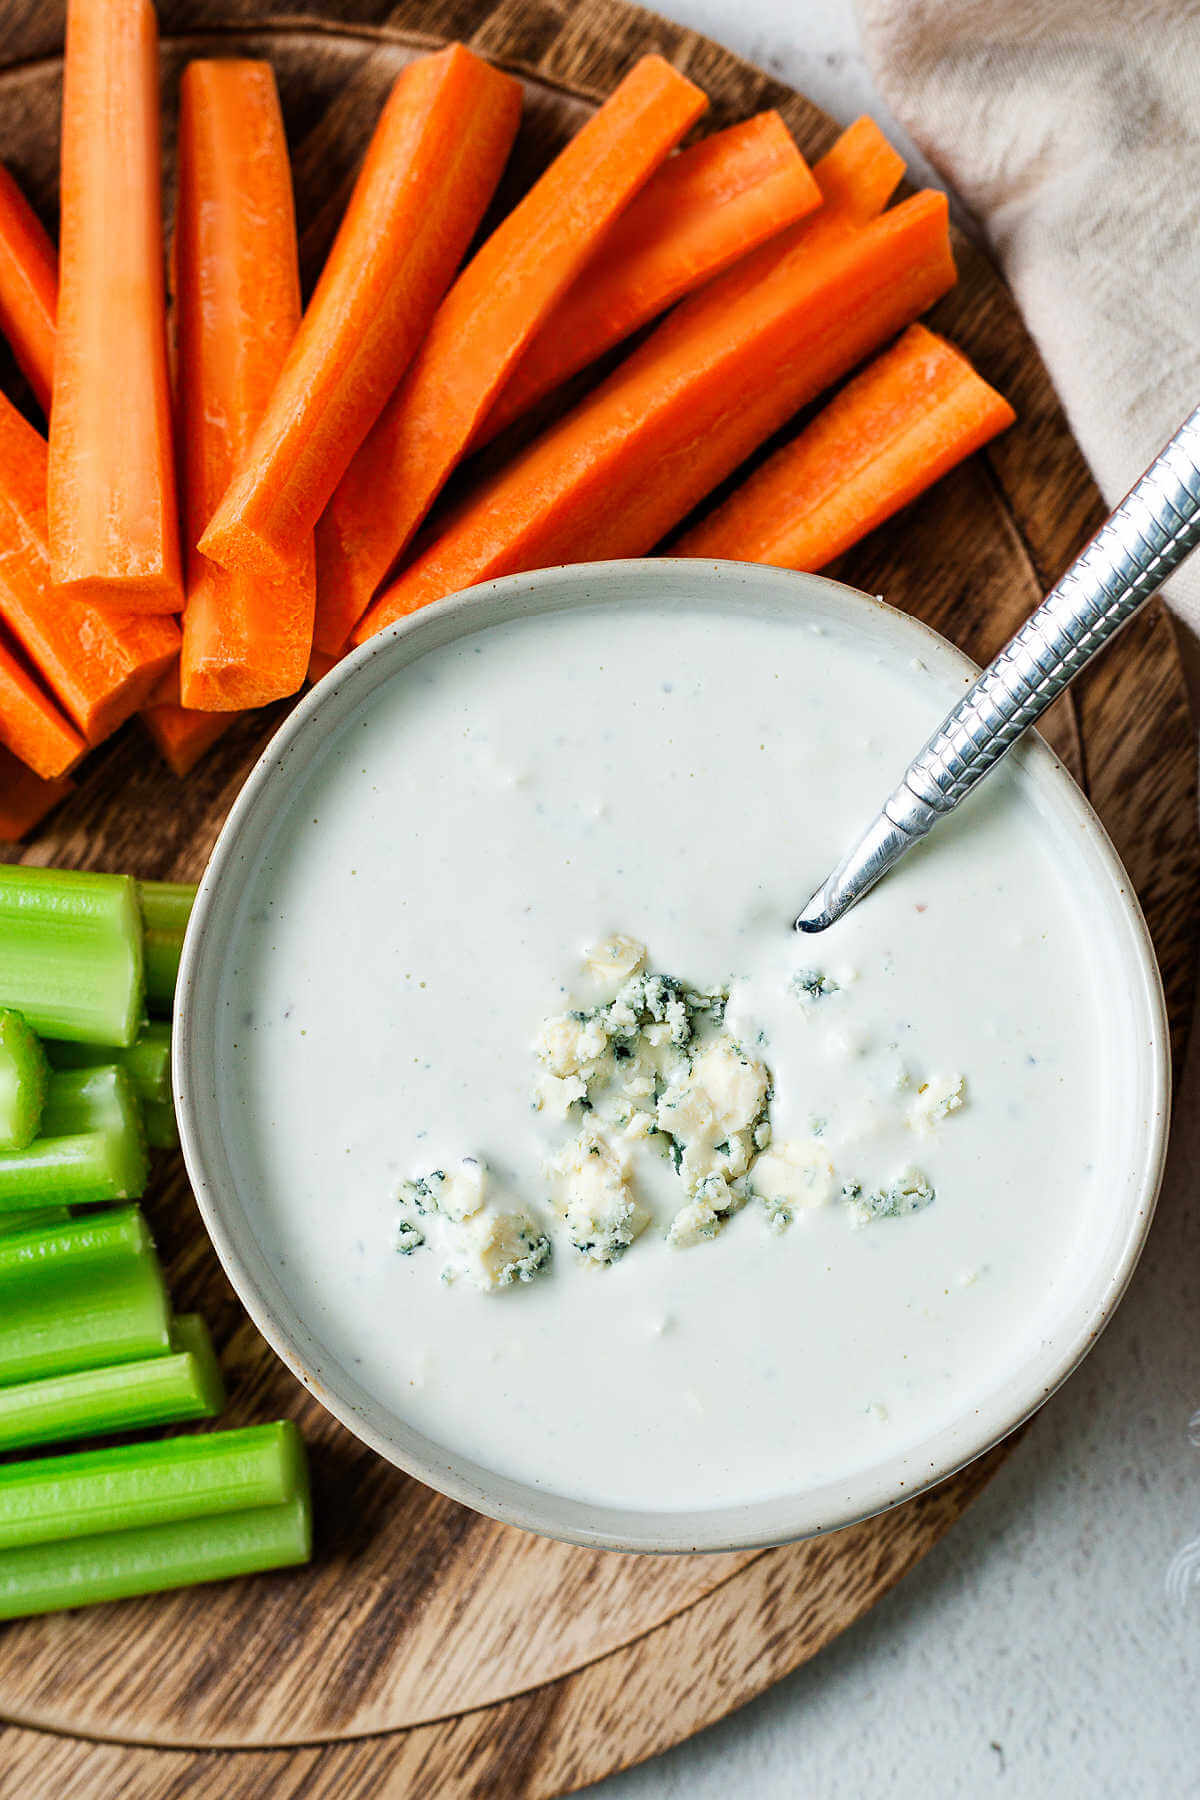 Blue cheese dressing in a bowl on a platter of carrot and celery sticks.